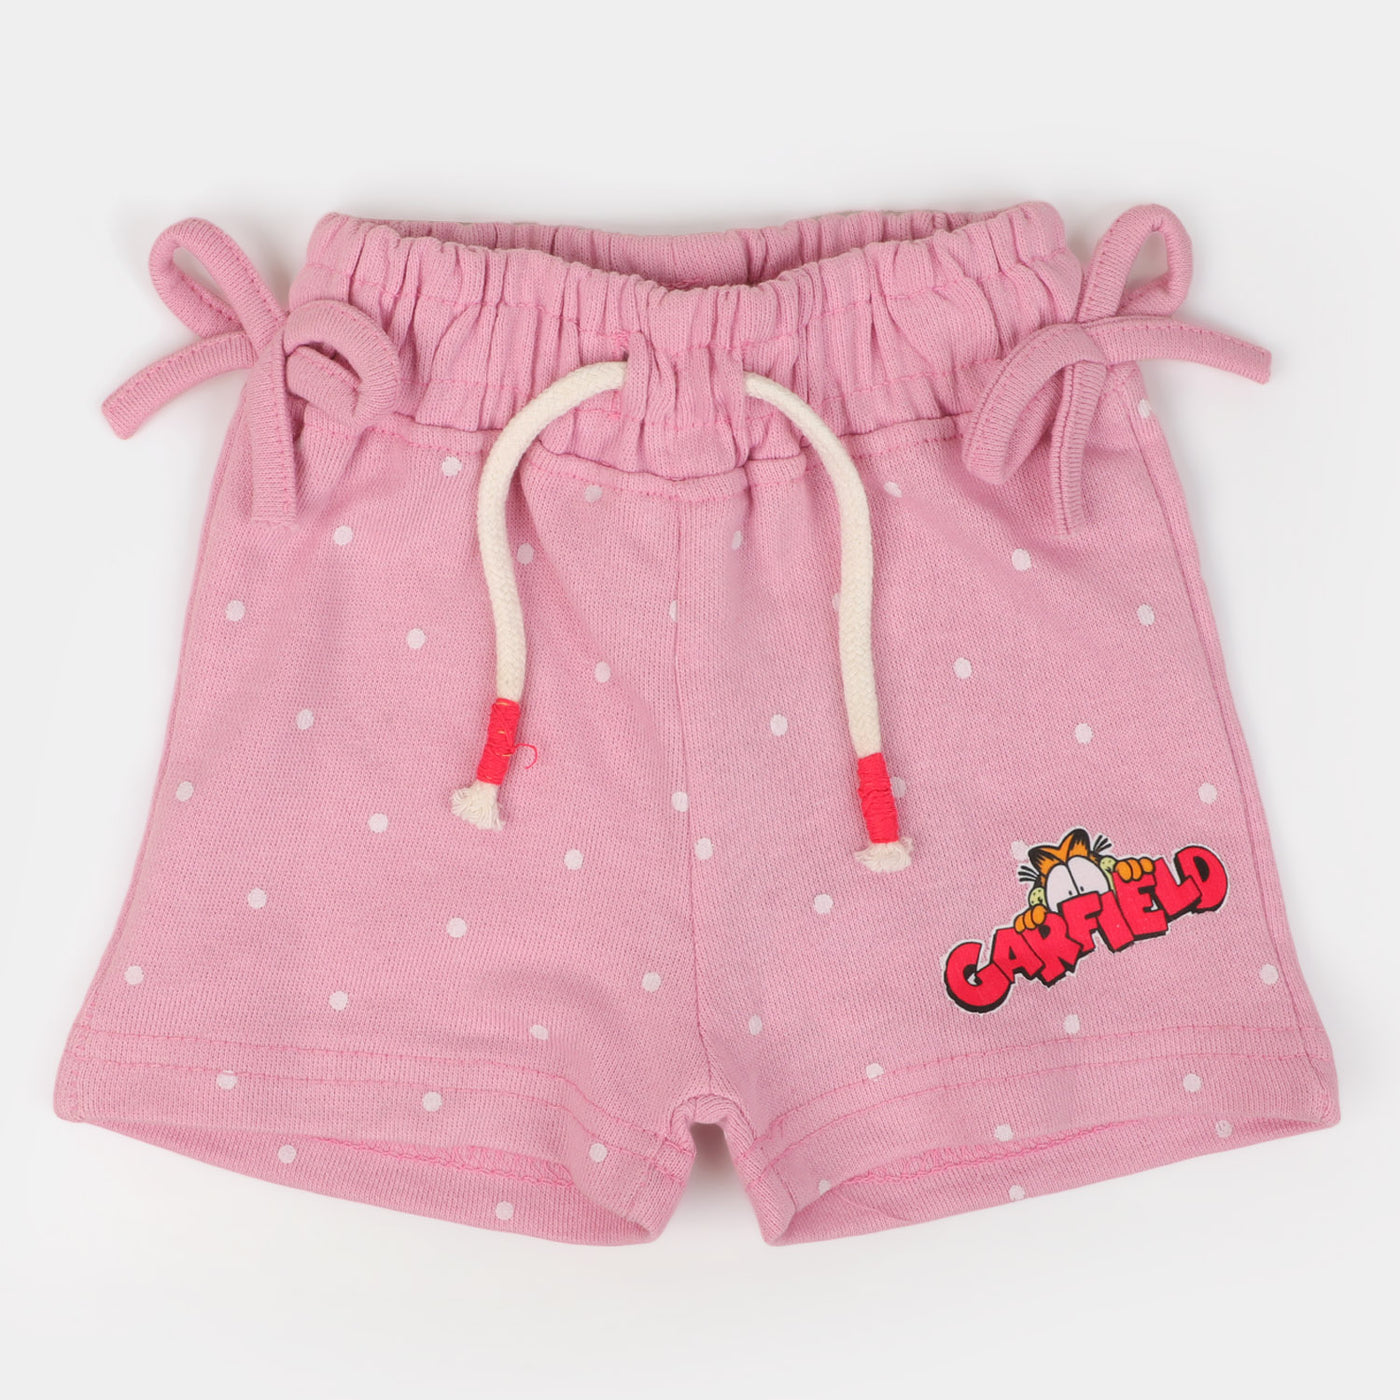 Infant Girls Knitted Short Character - Baby Pink